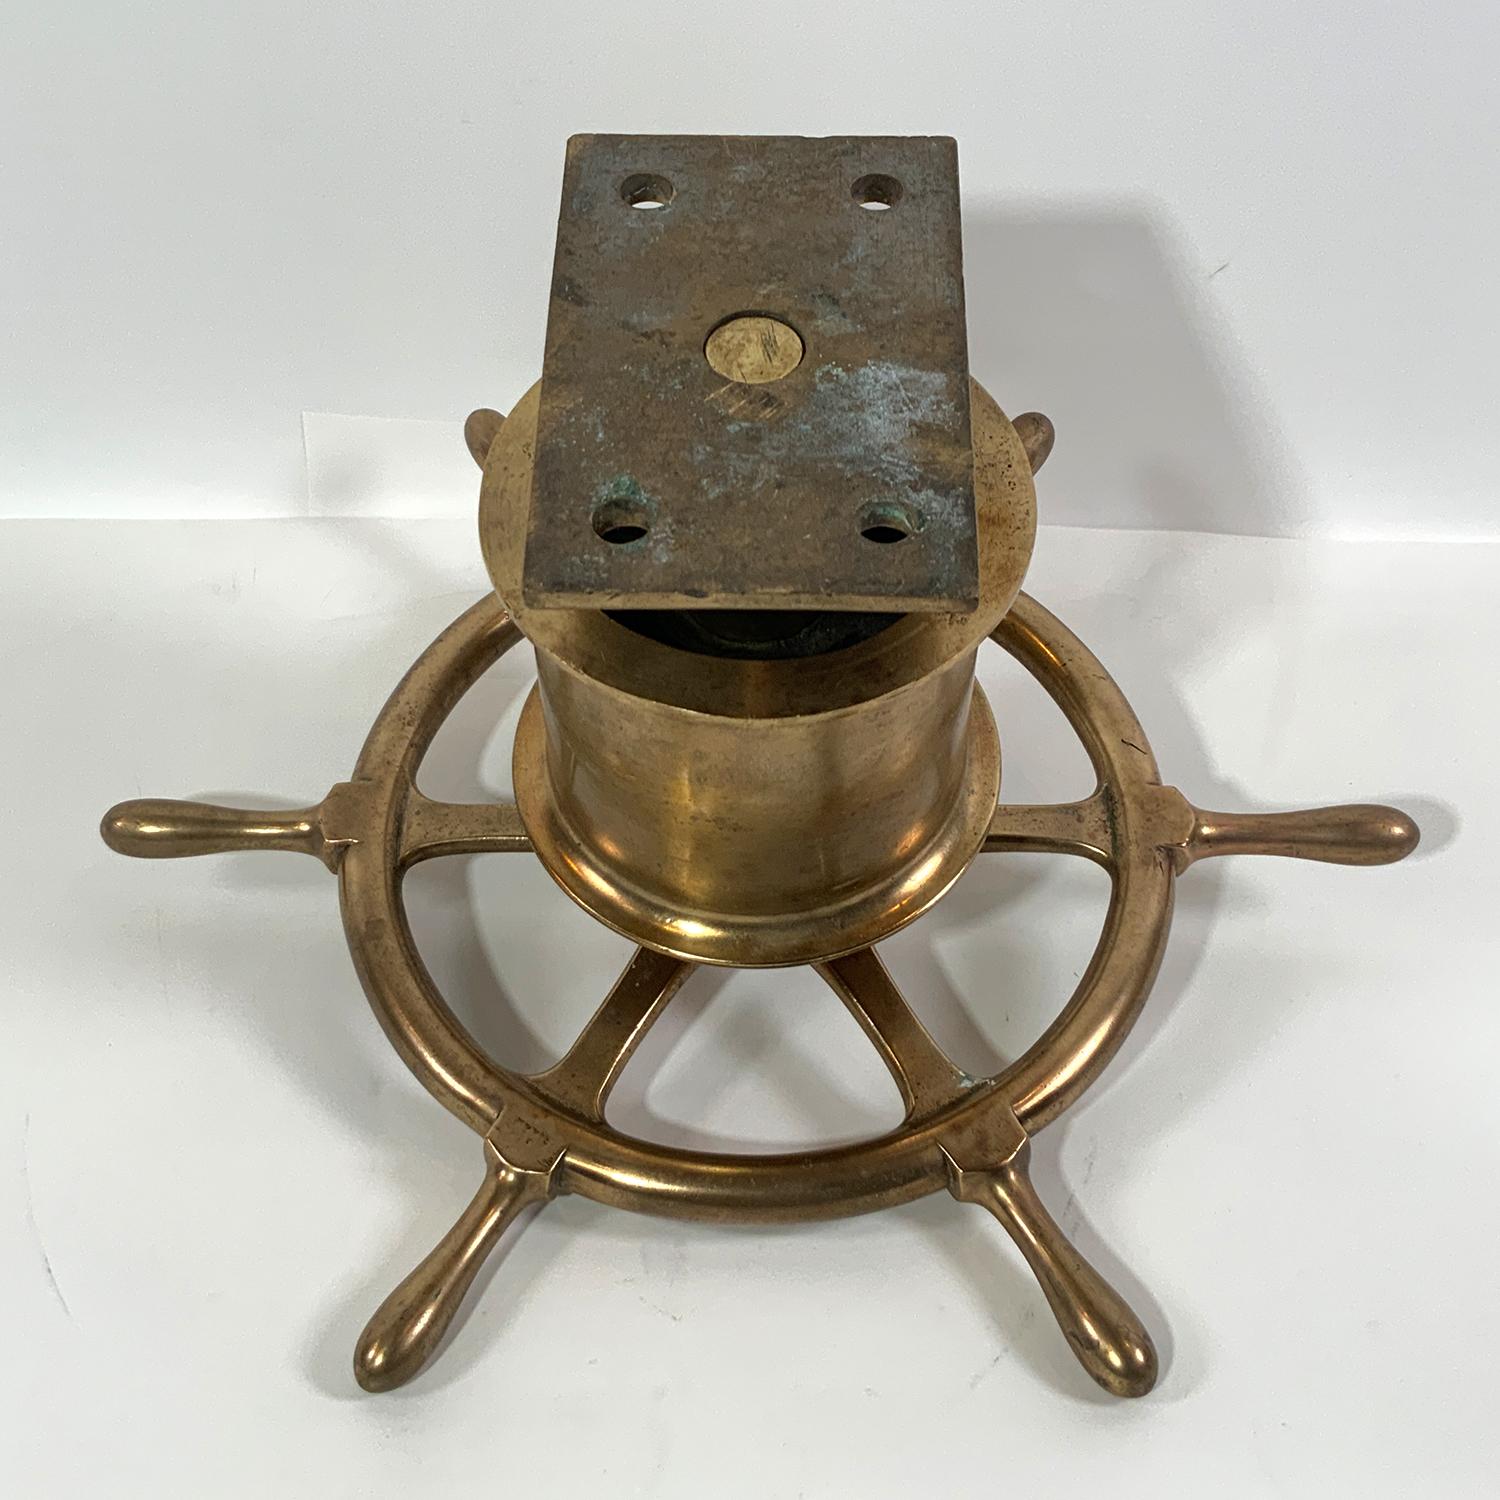 Solid Brass Yacht or Boat Wheel 1